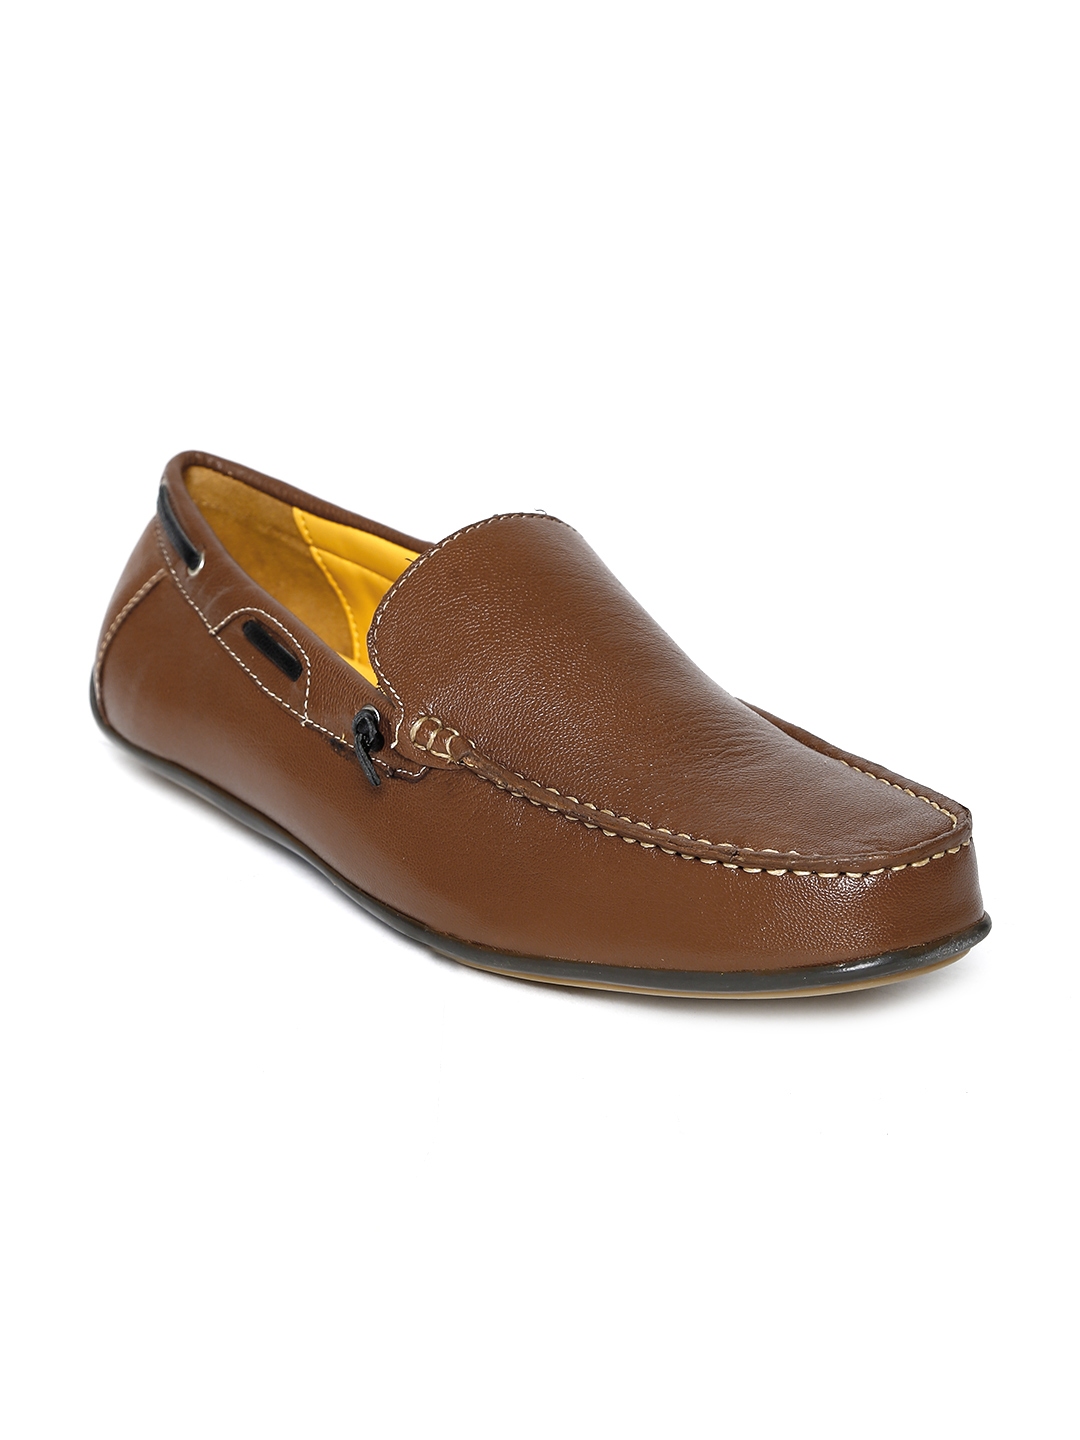 Buy Bata Men Brown Leather Loafers - Casual Shoes for Men 980233 | Myntra